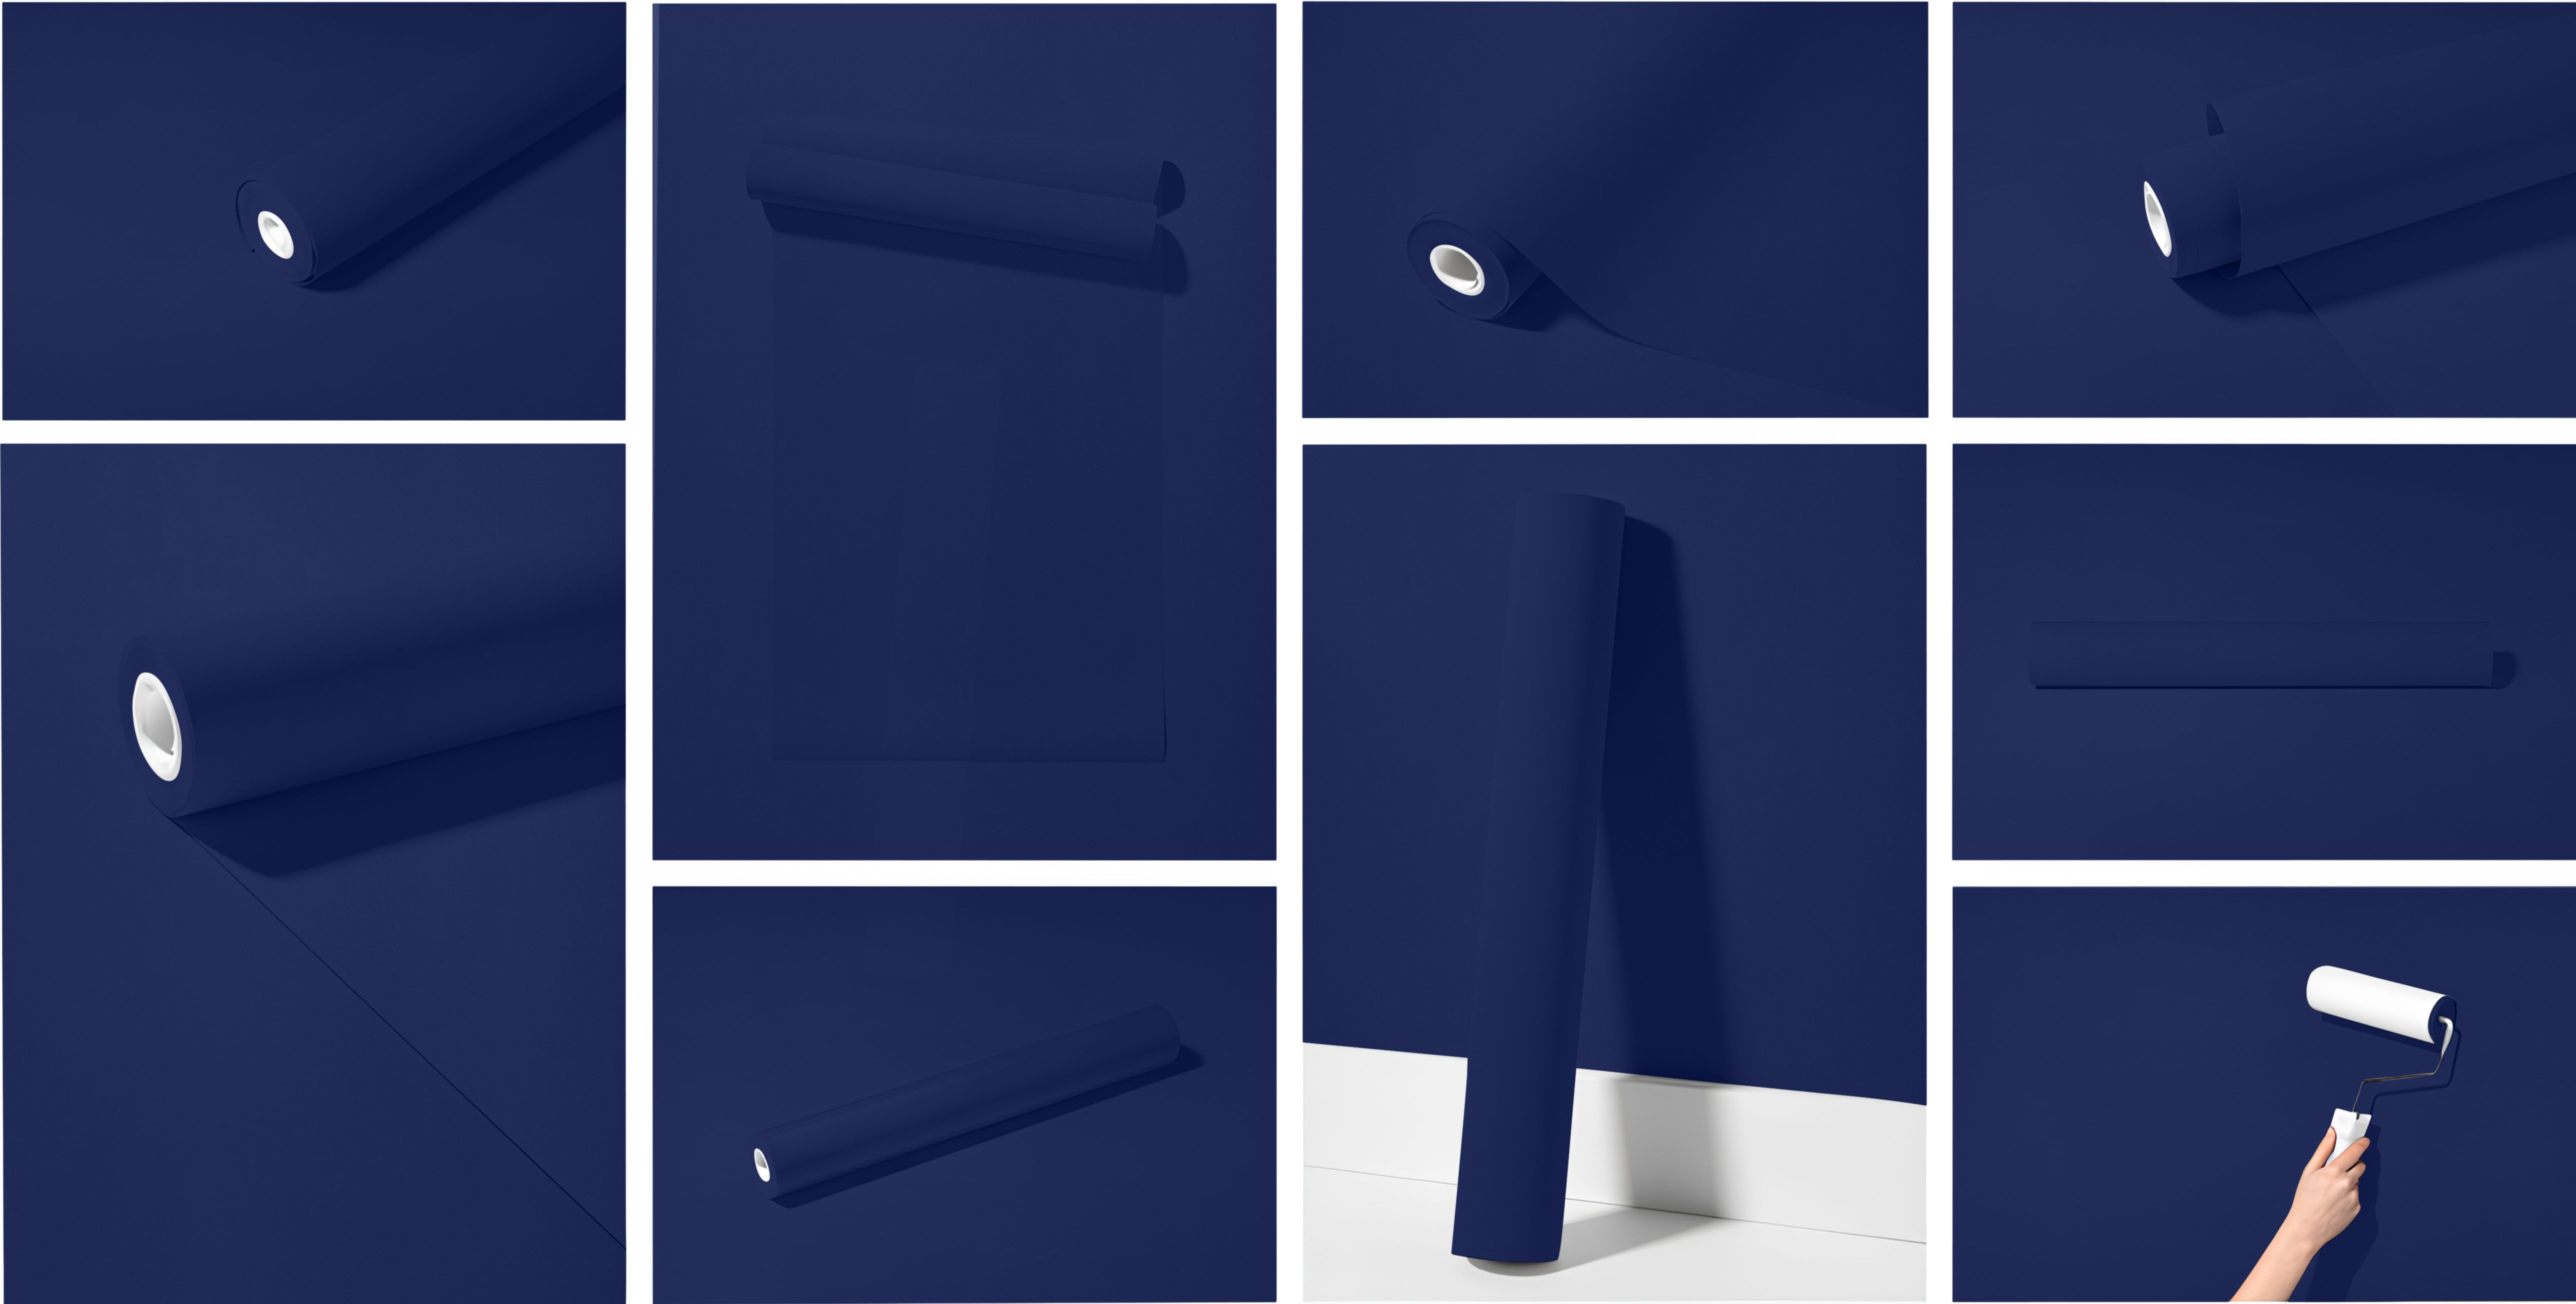 Peel & Stick Removable Re-usable Paint - Color RAL 5022 Night Blue - offRAL™ - RALRAW LLC, USA